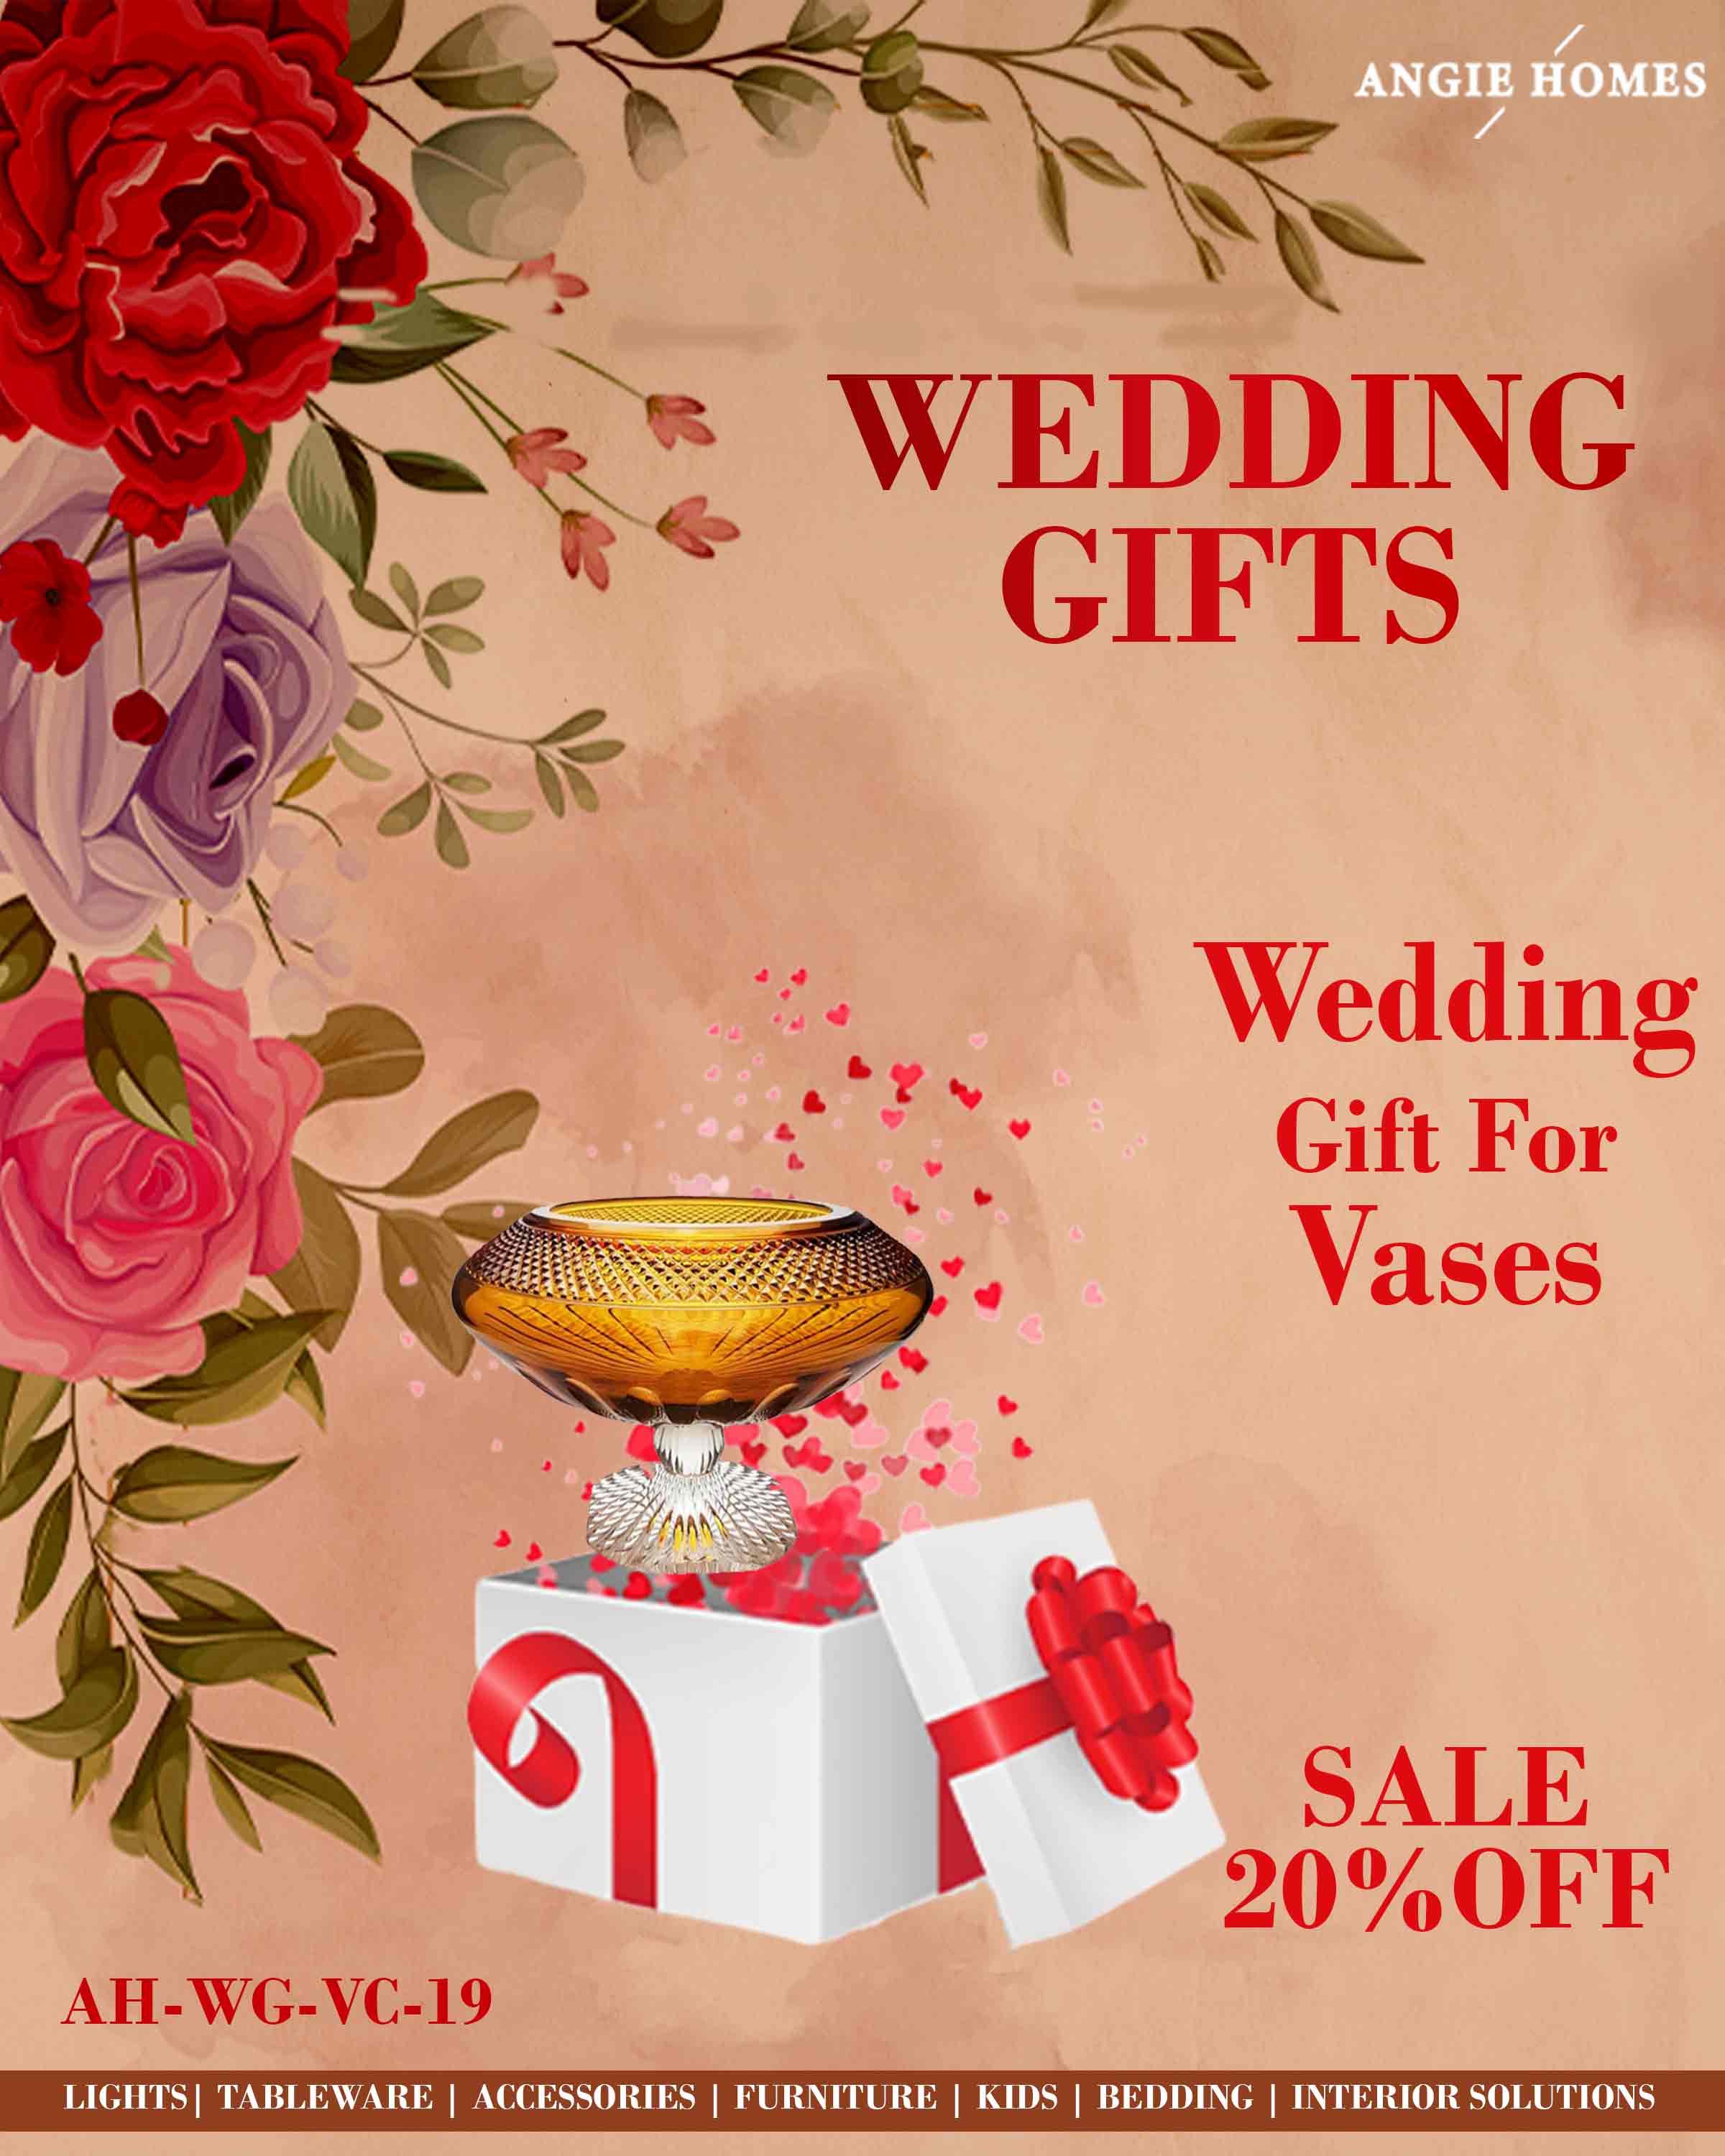 VASES FOR WEDDING GIFTS | MARRIAGE GIFT VOUCHER CARD | RETURN GIFTTING CARD ANGIE HOMES